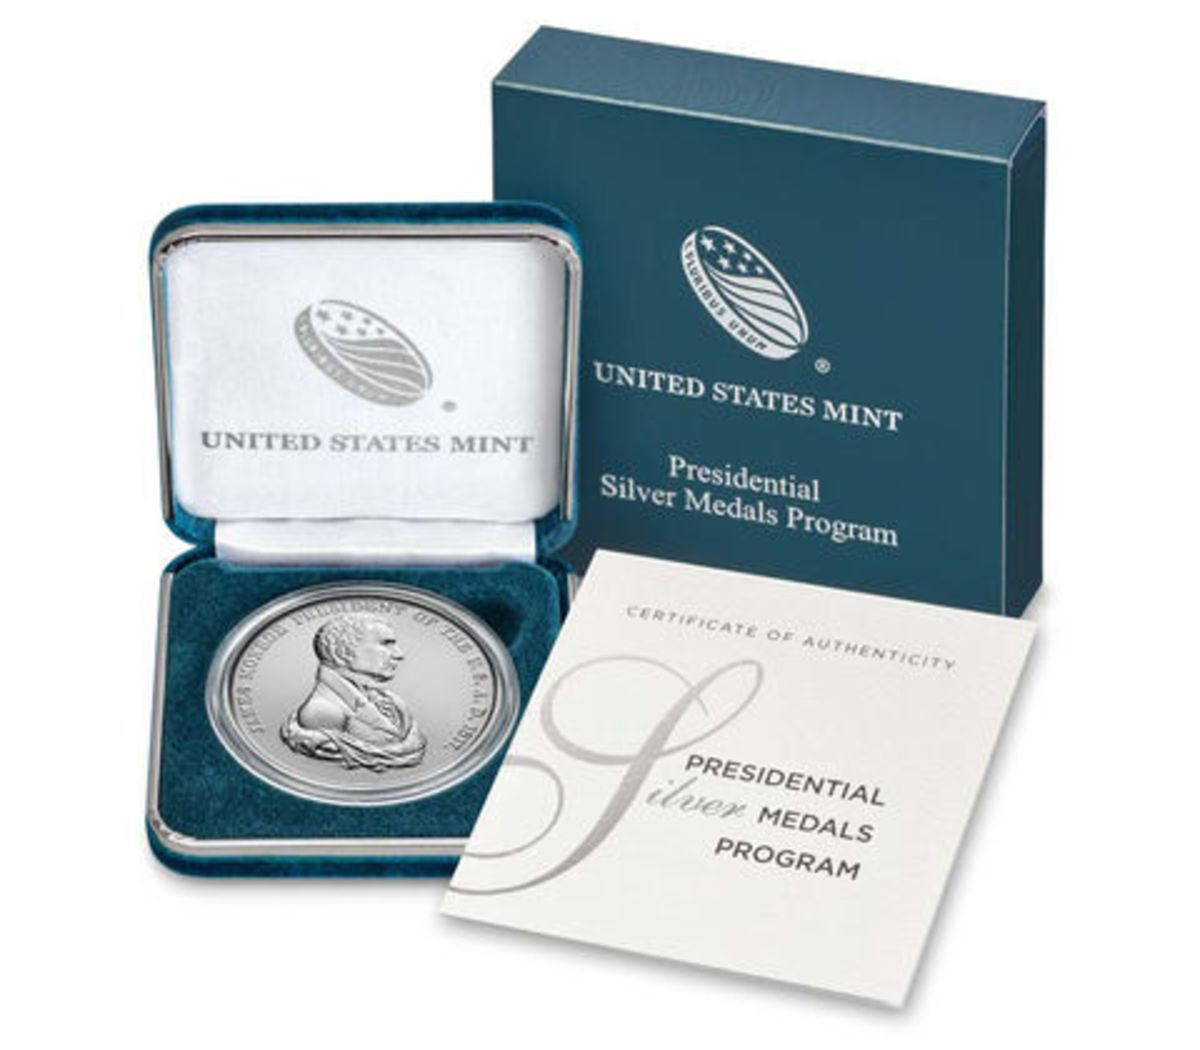 Silver Presidential Medal features one troy ounce of 99.9 percent fine silver. (Images courtesy of the United States Mint)